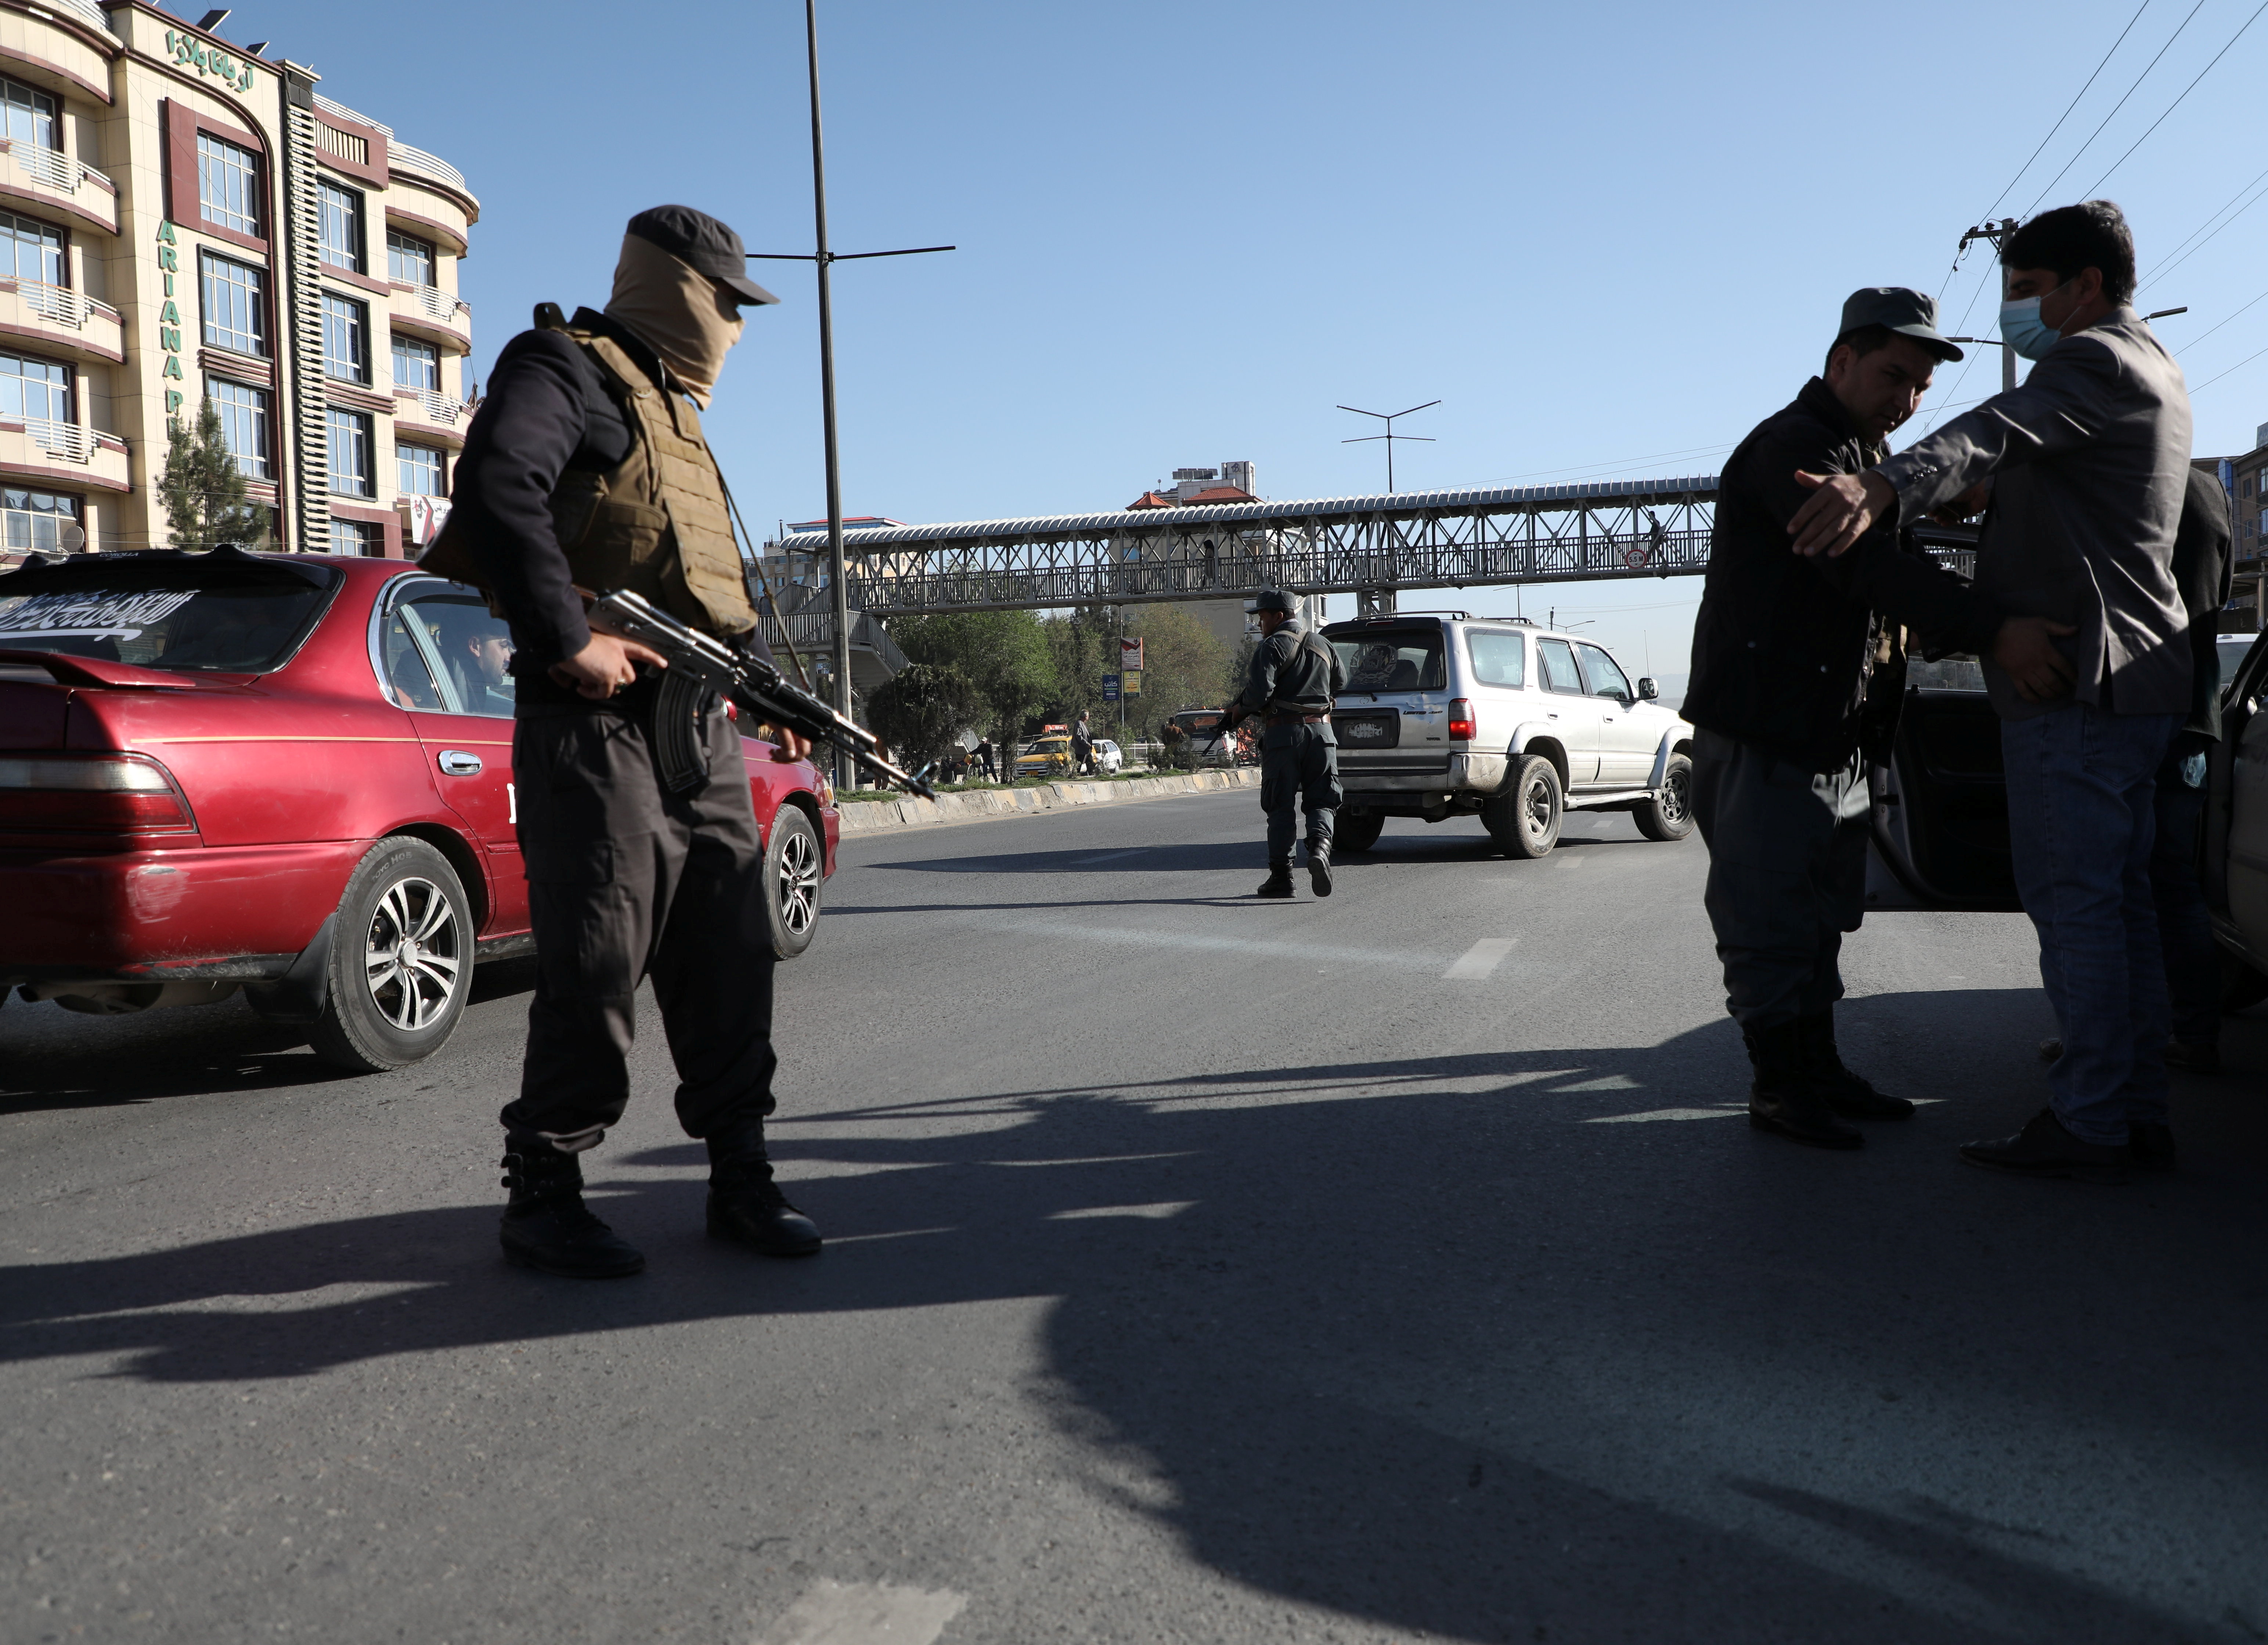 Afghan policemen keep watch at a checkpoint in Kabul, Afghanistan